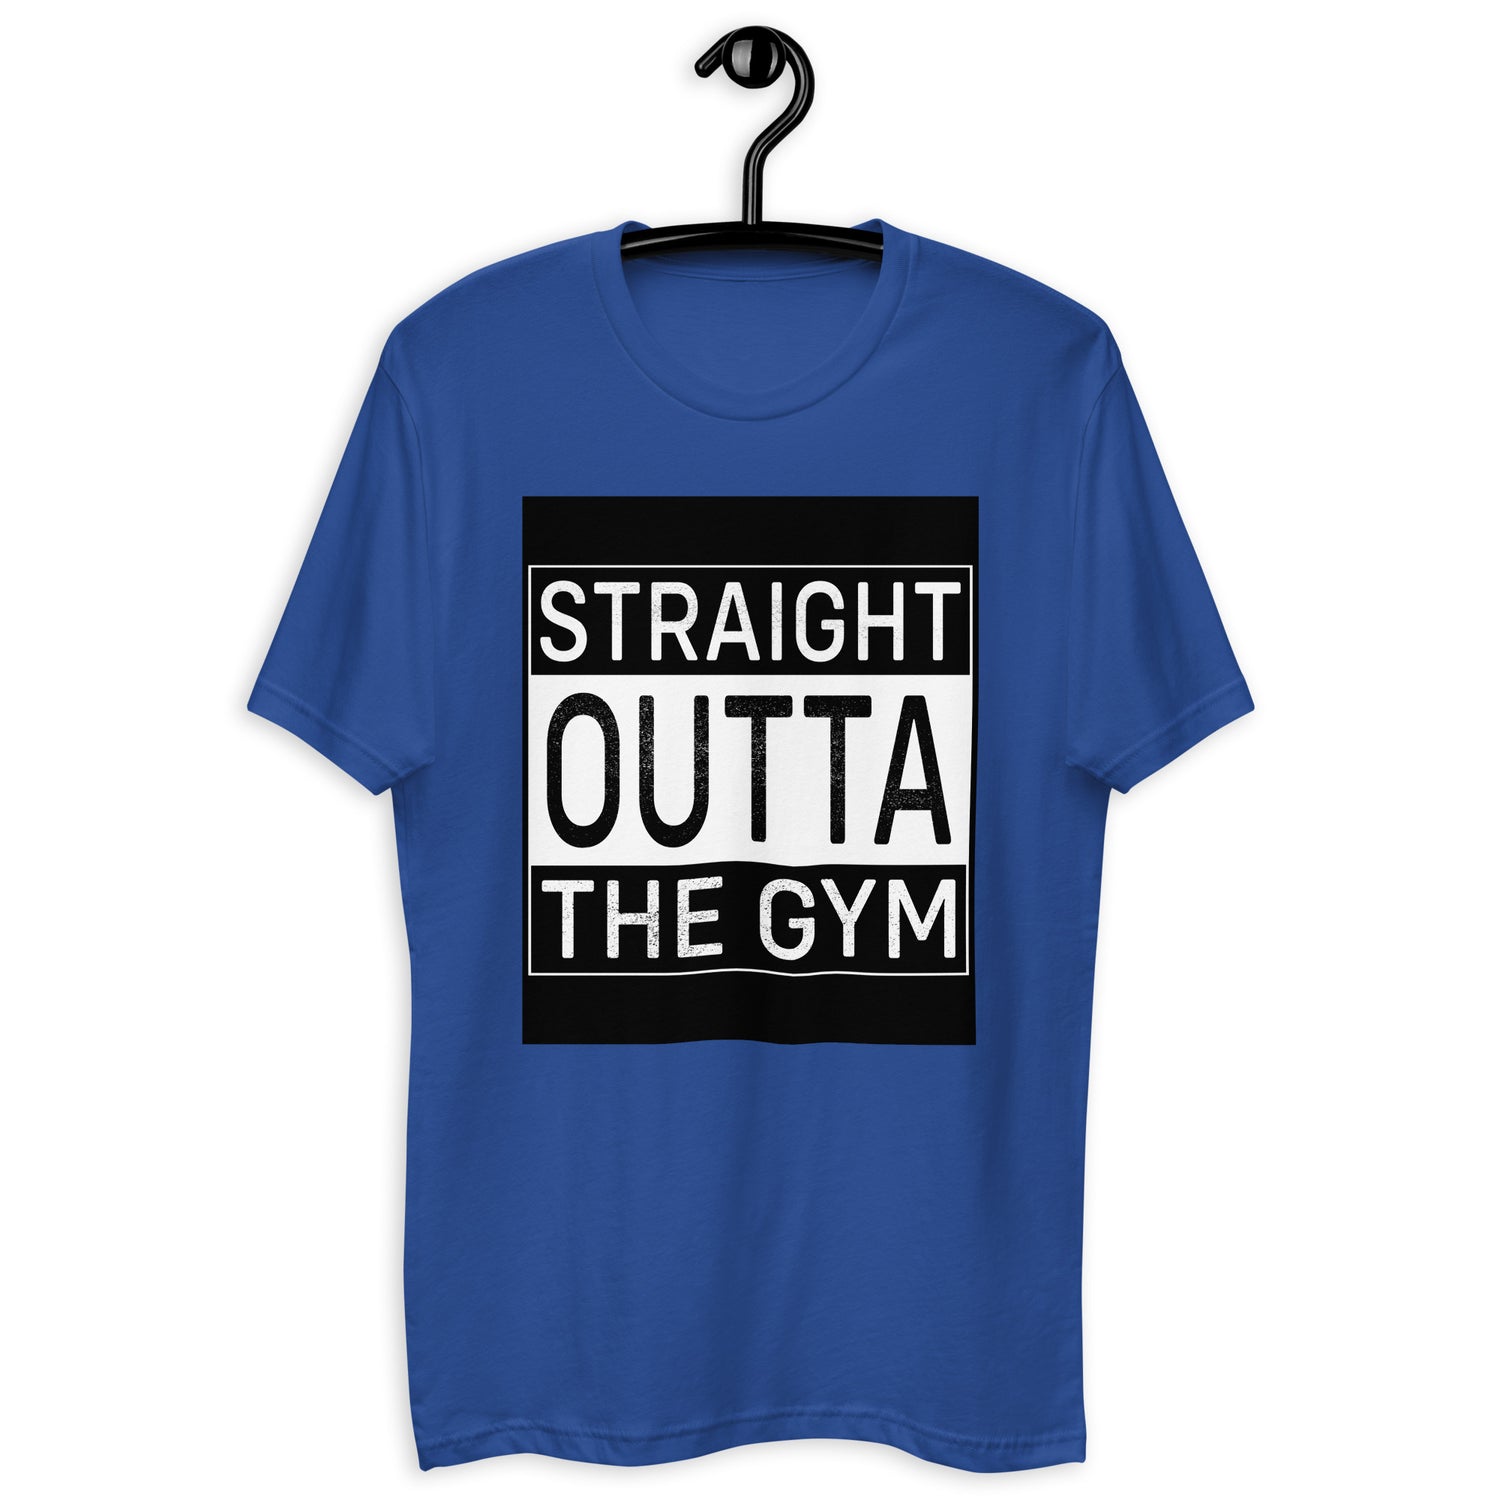 Sparkle-kiss-creations-straight-out-of-the-gym-t-shirt-royal-blue